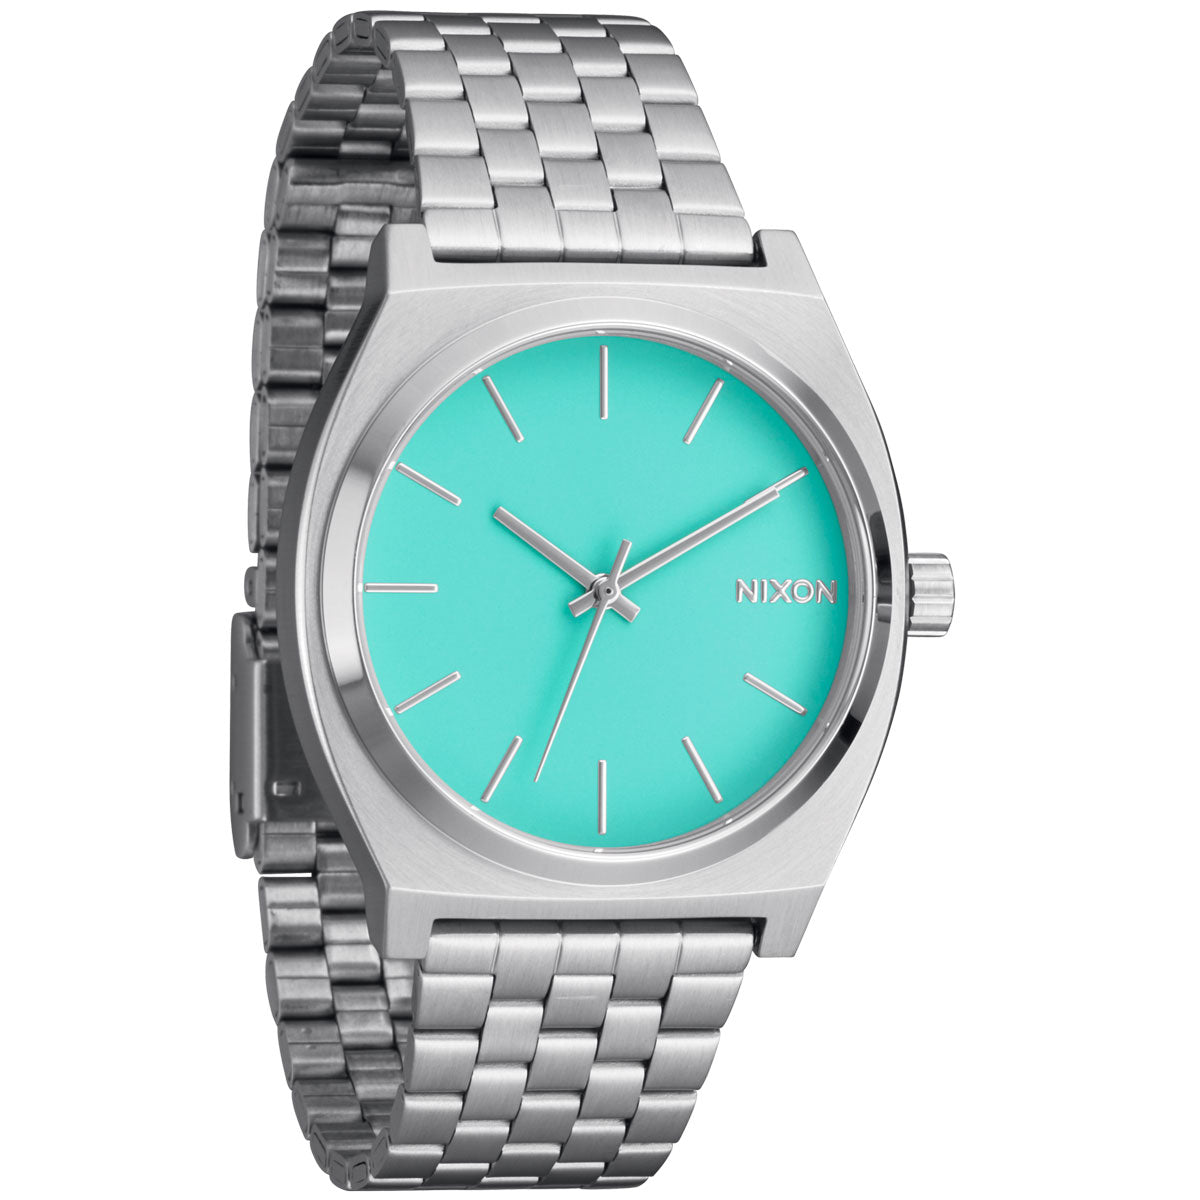 Nixon Time Teller Watch - Silver/Turquoise image 2